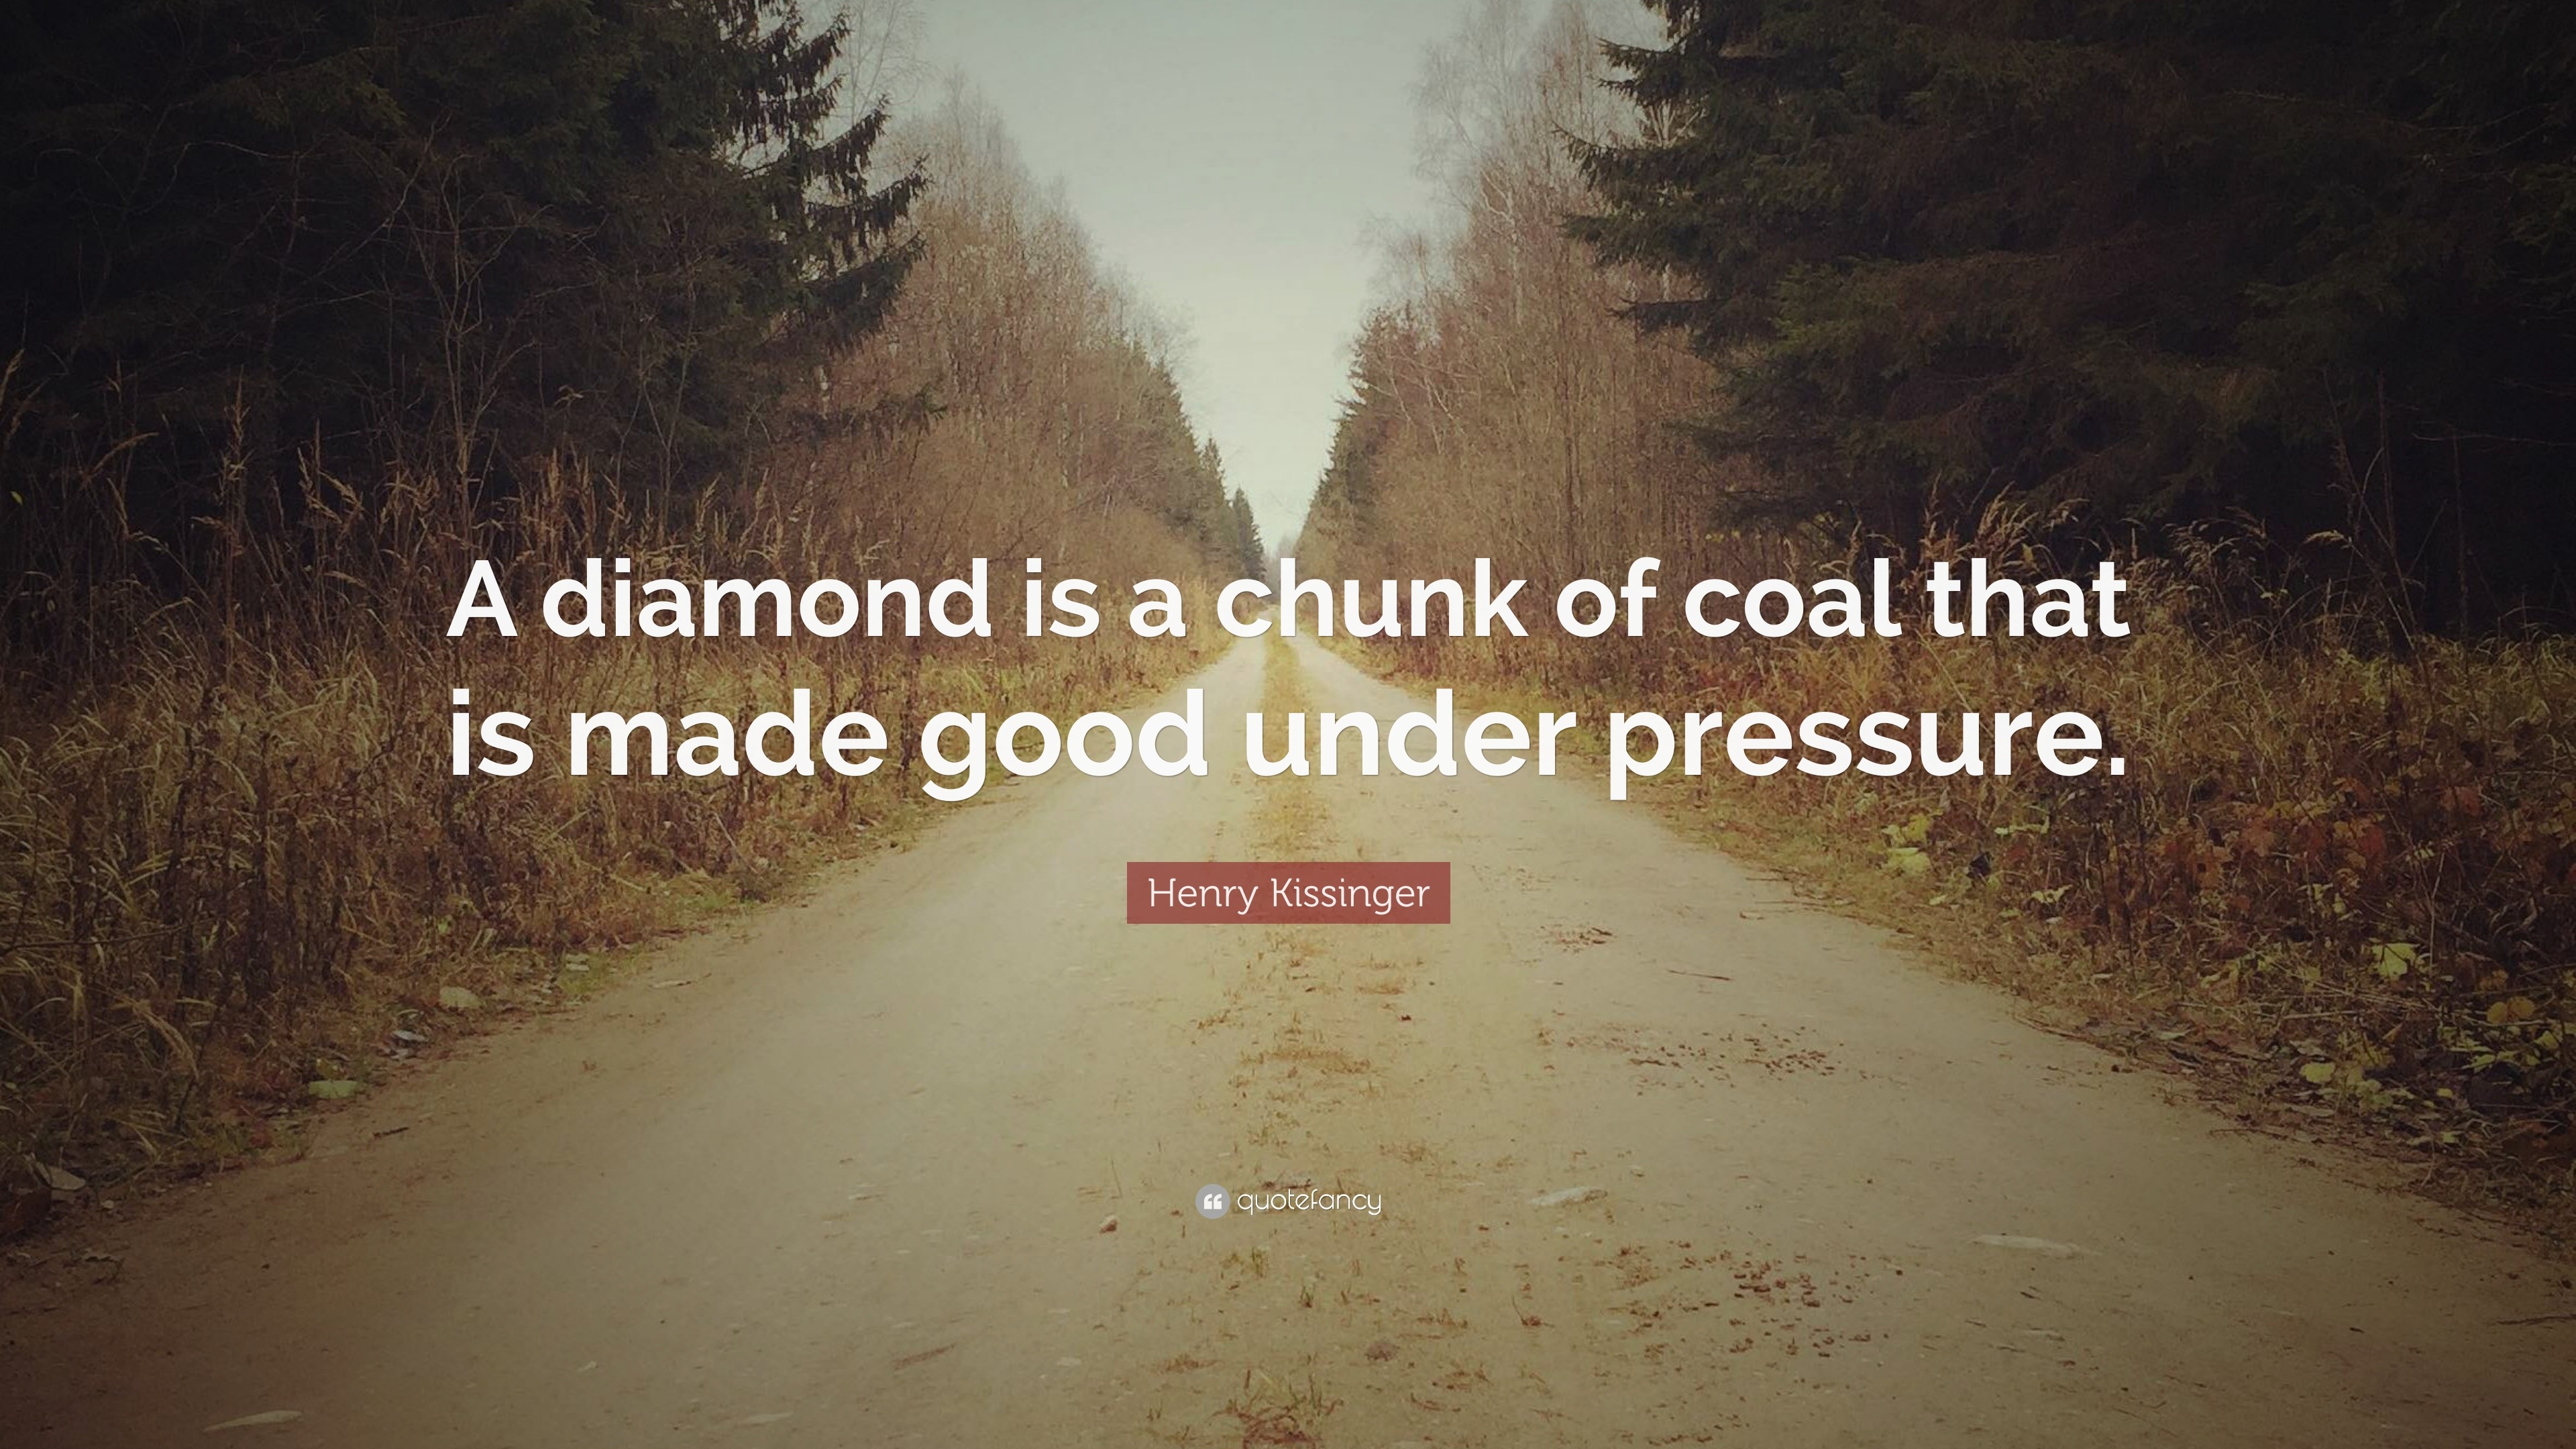 Henry Kissinger Quote A Diamond Is A Chunk Of Coal That Is Made Good Under Pressure